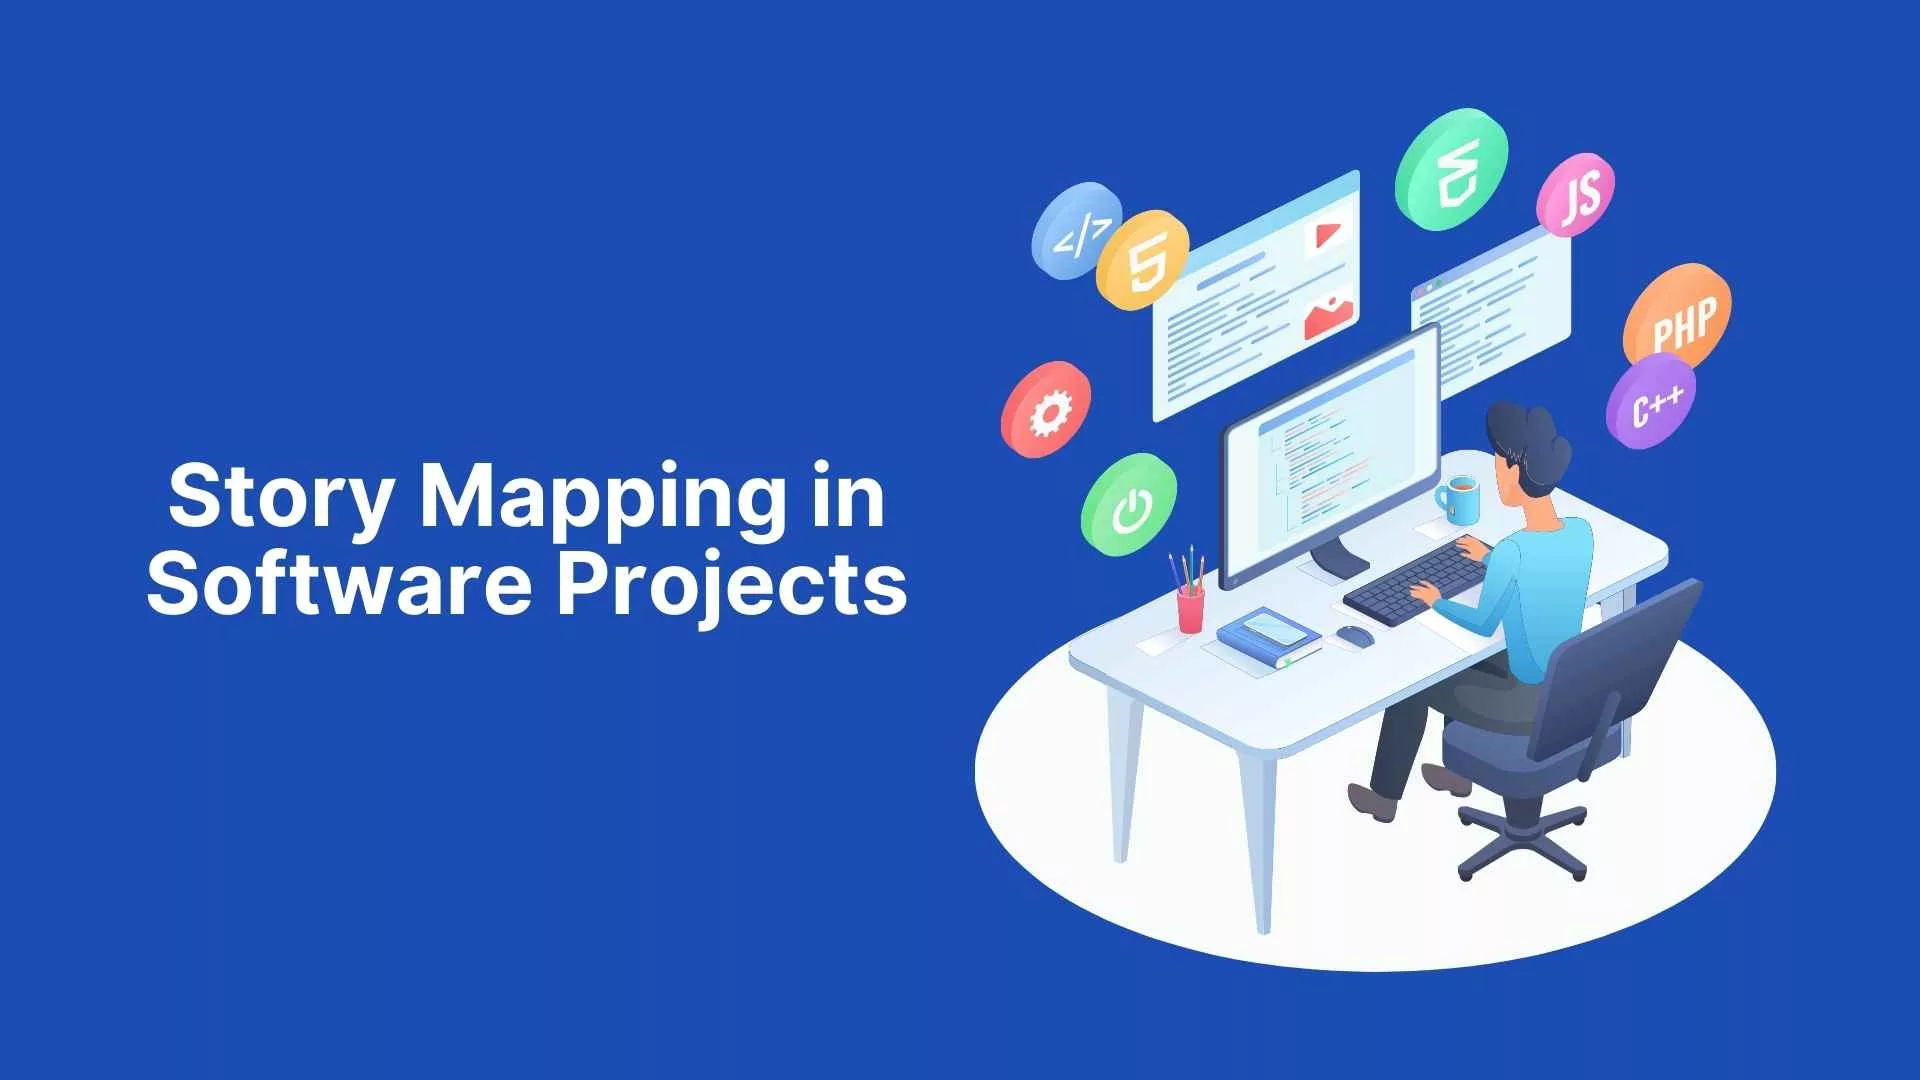 Story Mapping in Software Projects